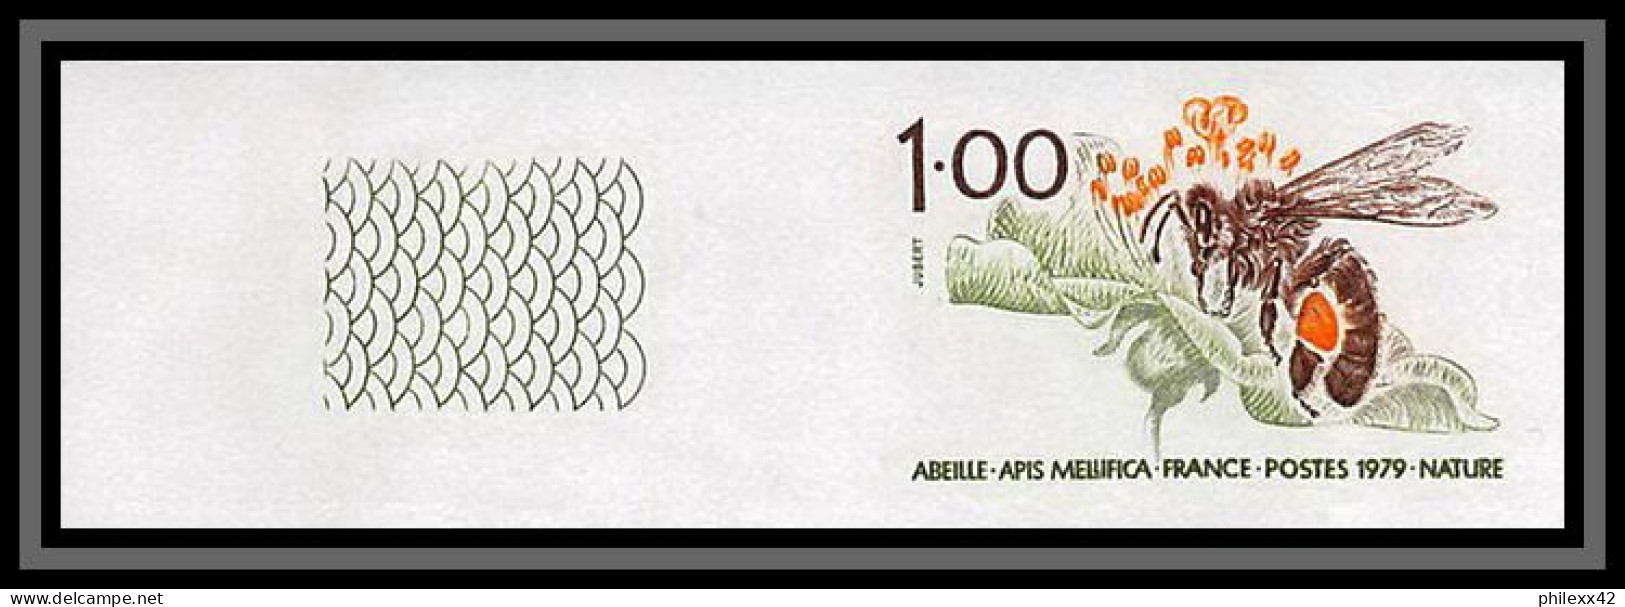 France N°2039 Abeille Insecte (insect) Bee Apis Mellifica Non Dentelé ** MNH (Imperf) - Honeybees